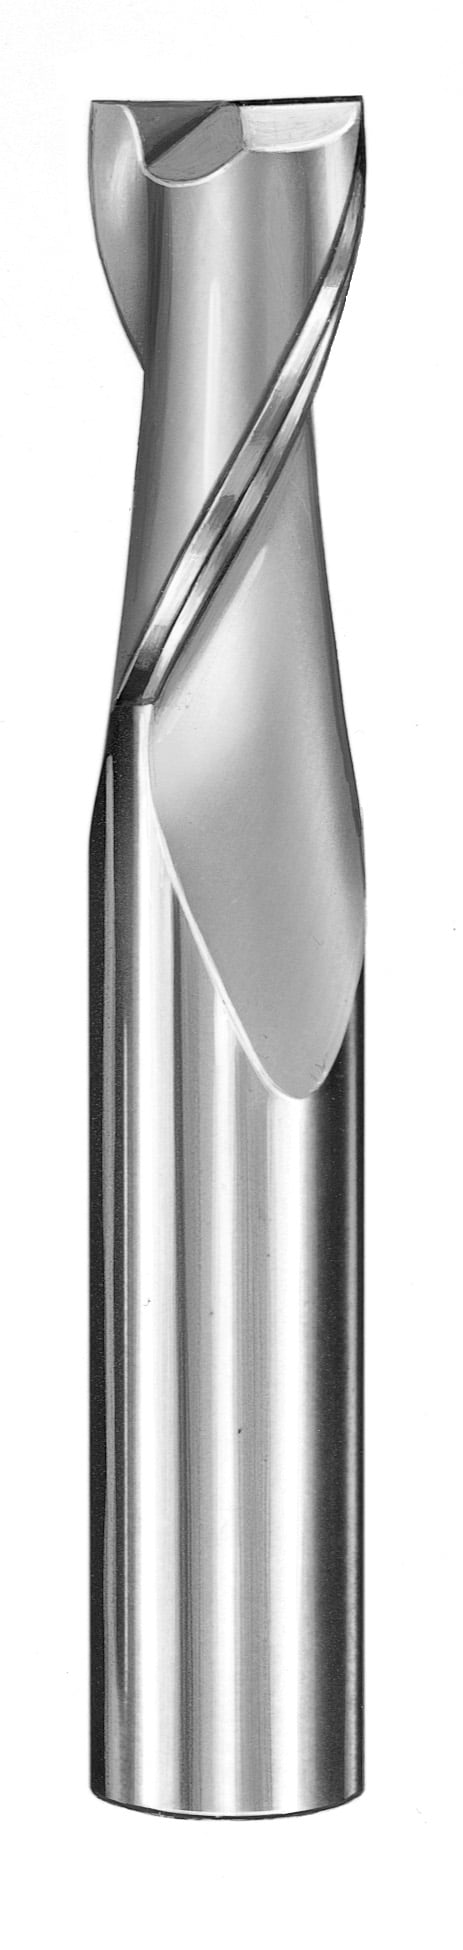 3/8" Dia, 2 Flute, Square End End Mill - 30347